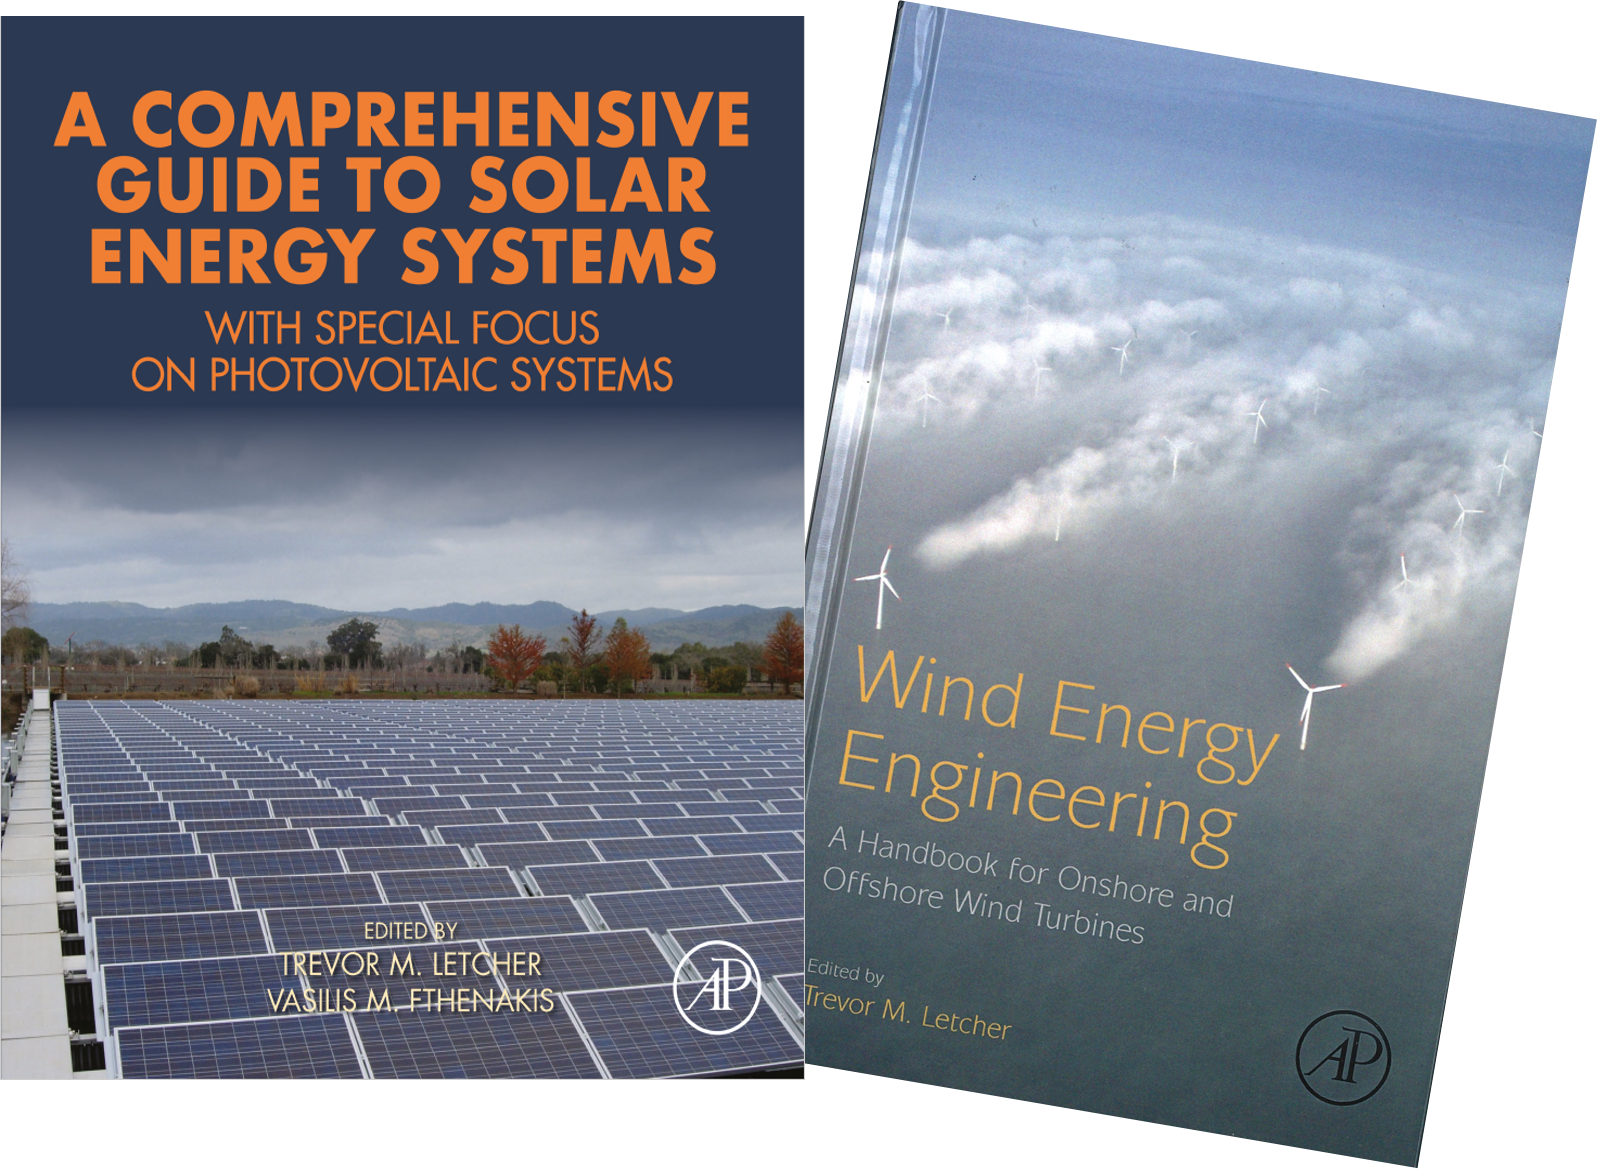 Book covers - Energy Transition